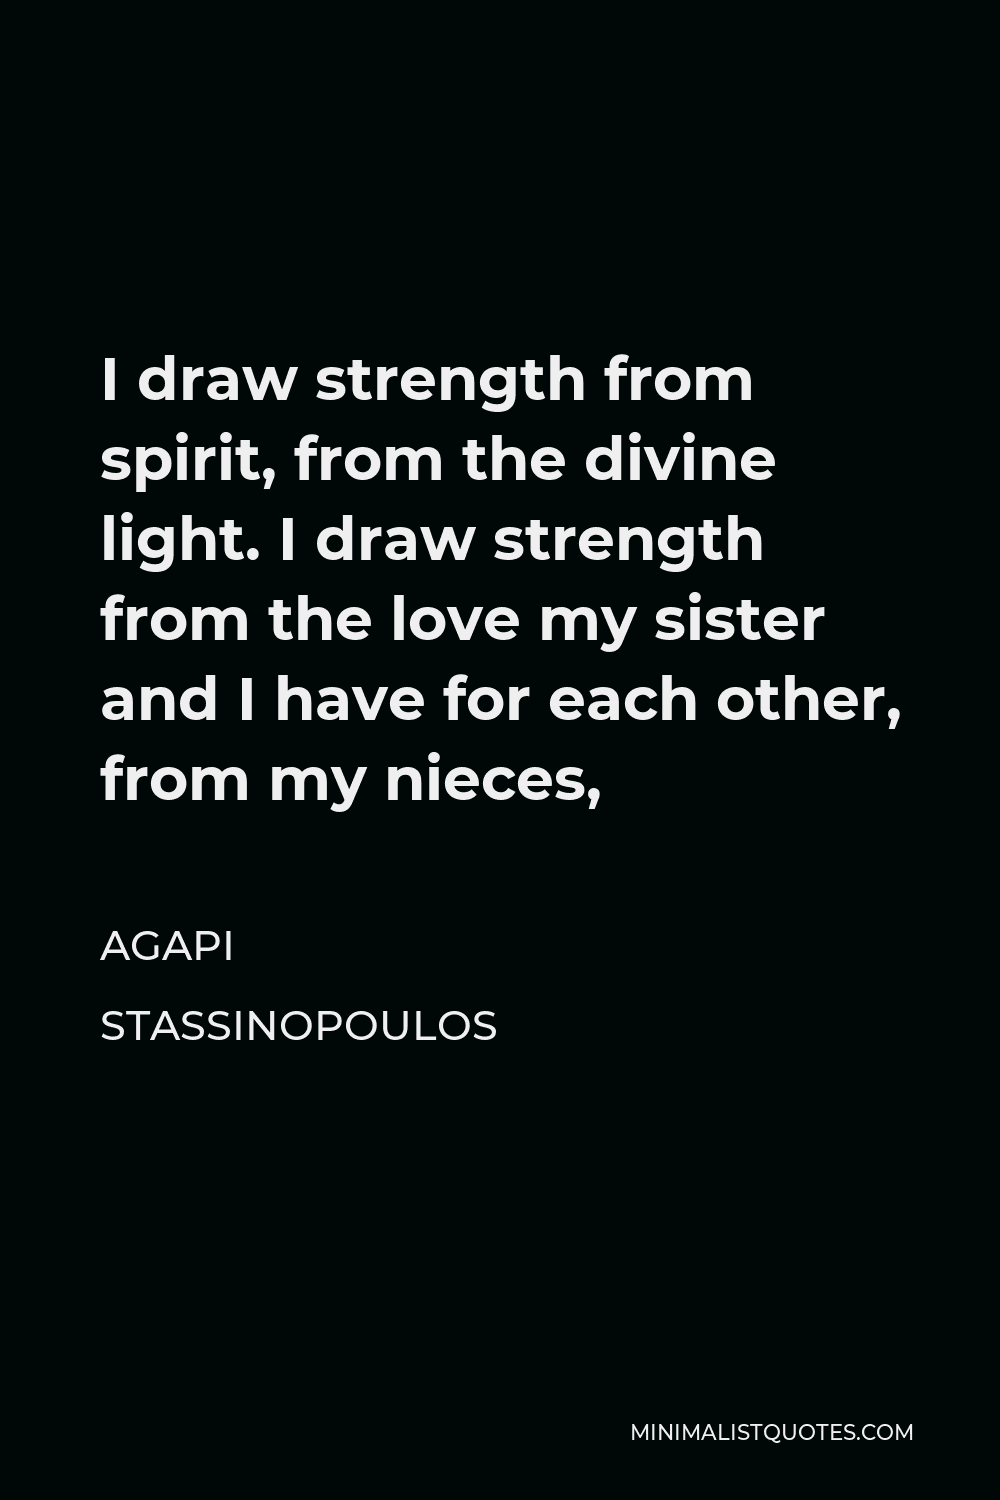 Agapi Stassinopoulos Quote - I draw strength from spirit, from the divine light. I draw strength from the love my sister and I have for each other, from my nieces,